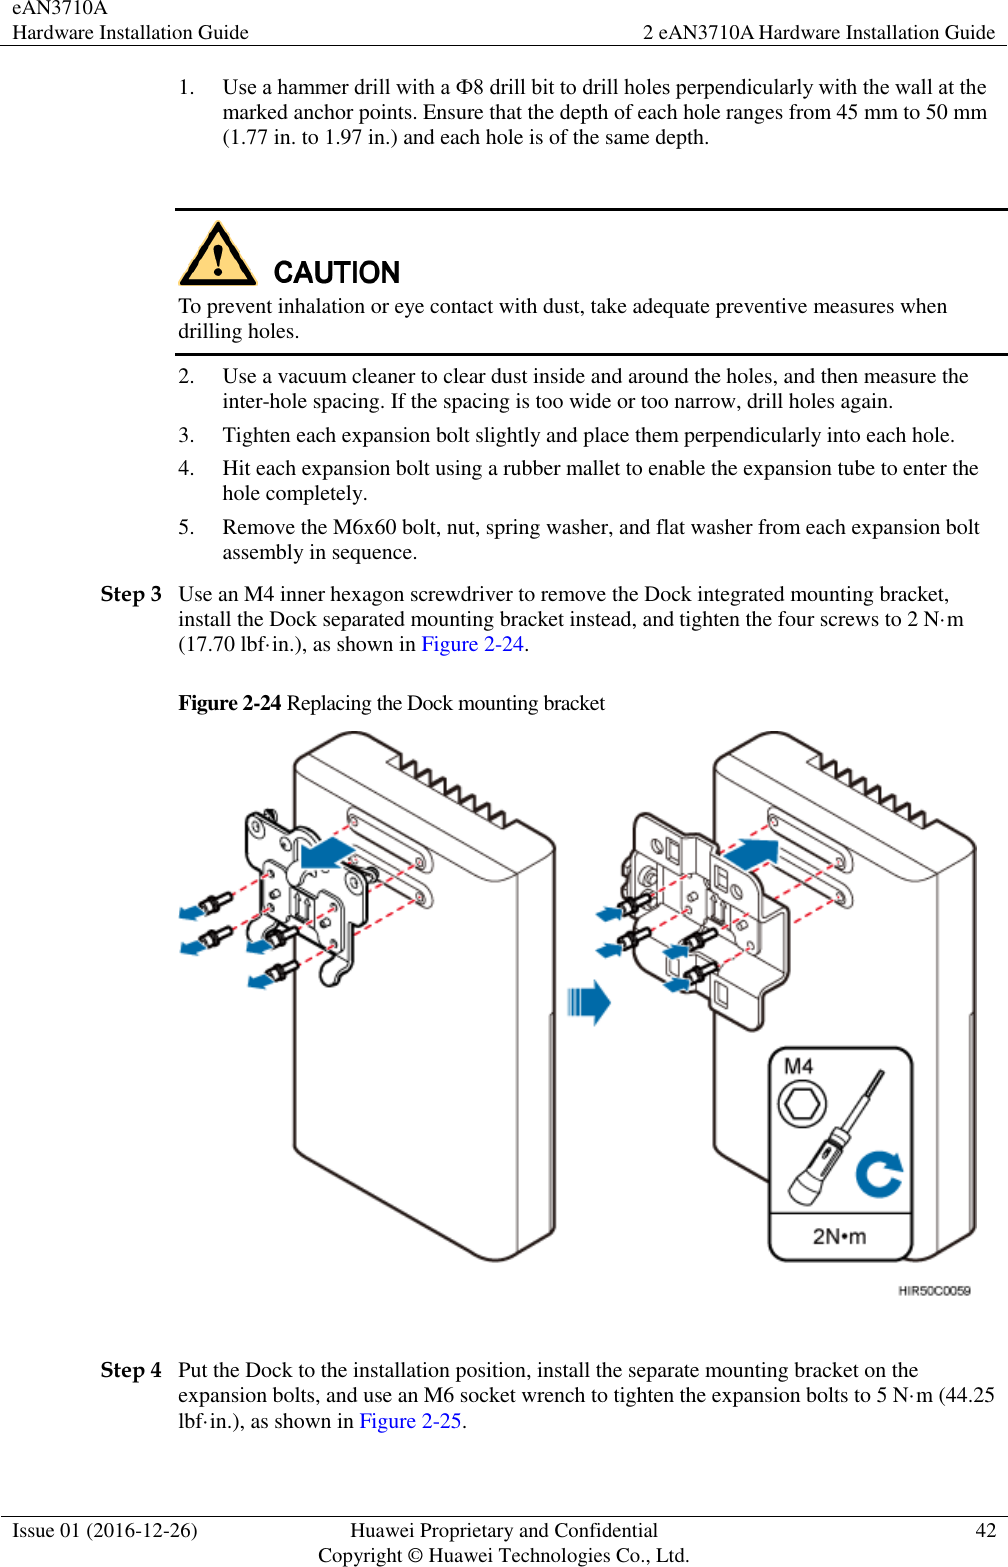 eAN3710A Hardware Installation Guide 2 eAN3710A Hardware Installation Guide  Issue 01 (2016-12-26) Huawei Proprietary and Confidential                                     Copyright © Huawei Technologies Co., Ltd. 42  1. Use a hammer drill with a Ф8 drill bit to drill holes perpendicularly with the wall at the marked anchor points. Ensure that the depth of each hole ranges from 45 mm to 50 mm (1.77 in. to 1.97 in.) and each hole is of the same depth.   To prevent inhalation or eye contact with dust, take adequate preventive measures when drilling holes.   2. Use a vacuum cleaner to clear dust inside and around the holes, and then measure the inter-hole spacing. If the spacing is too wide or too narrow, drill holes again. 3. Tighten each expansion bolt slightly and place them perpendicularly into each hole. 4. Hit each expansion bolt using a rubber mallet to enable the expansion tube to enter the hole completely. 5. Remove the M6x60 bolt, nut, spring washer, and flat washer from each expansion bolt assembly in sequence. Step 3 Use an M4 inner hexagon screwdriver to remove the Dock integrated mounting bracket, install the Dock separated mounting bracket instead, and tighten the four screws to 2 N·m (17.70 lbf·in.), as shown in Figure 2-24. Figure 2-24 Replacing the Dock mounting bracket   Step 4 Put the Dock to the installation position, install the separate mounting bracket on the expansion bolts, and use an M6 socket wrench to tighten the expansion bolts to 5 N·m (44.25 lbf·in.), as shown in Figure 2-25. 